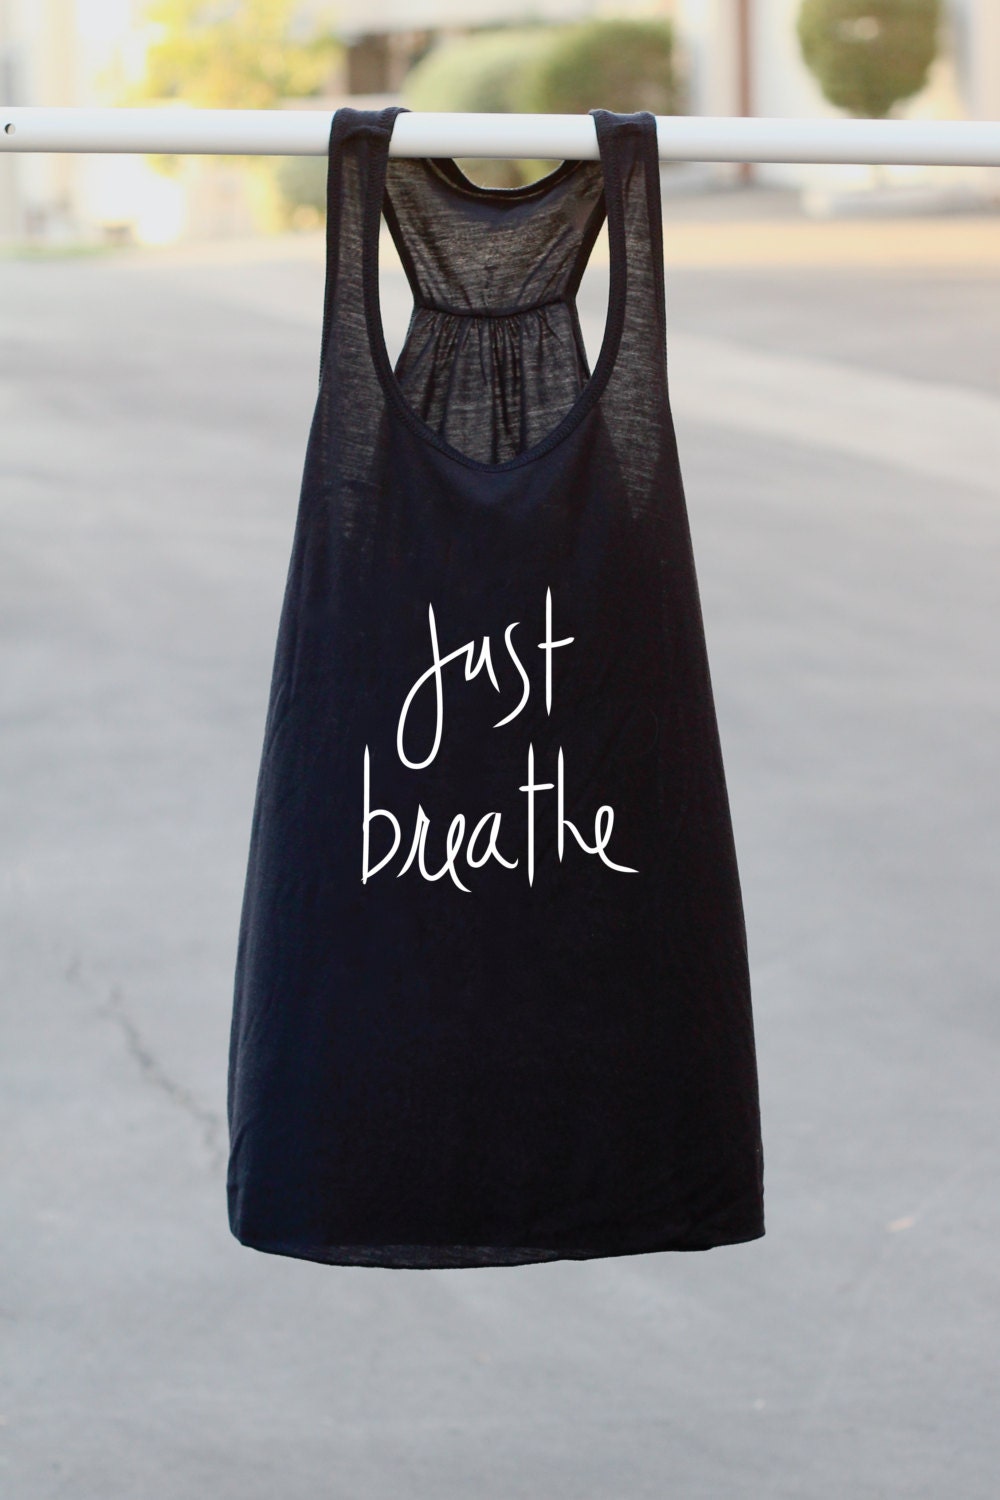 Tank Tops With Sayings Tank Tops For Women Just Breathe 6644